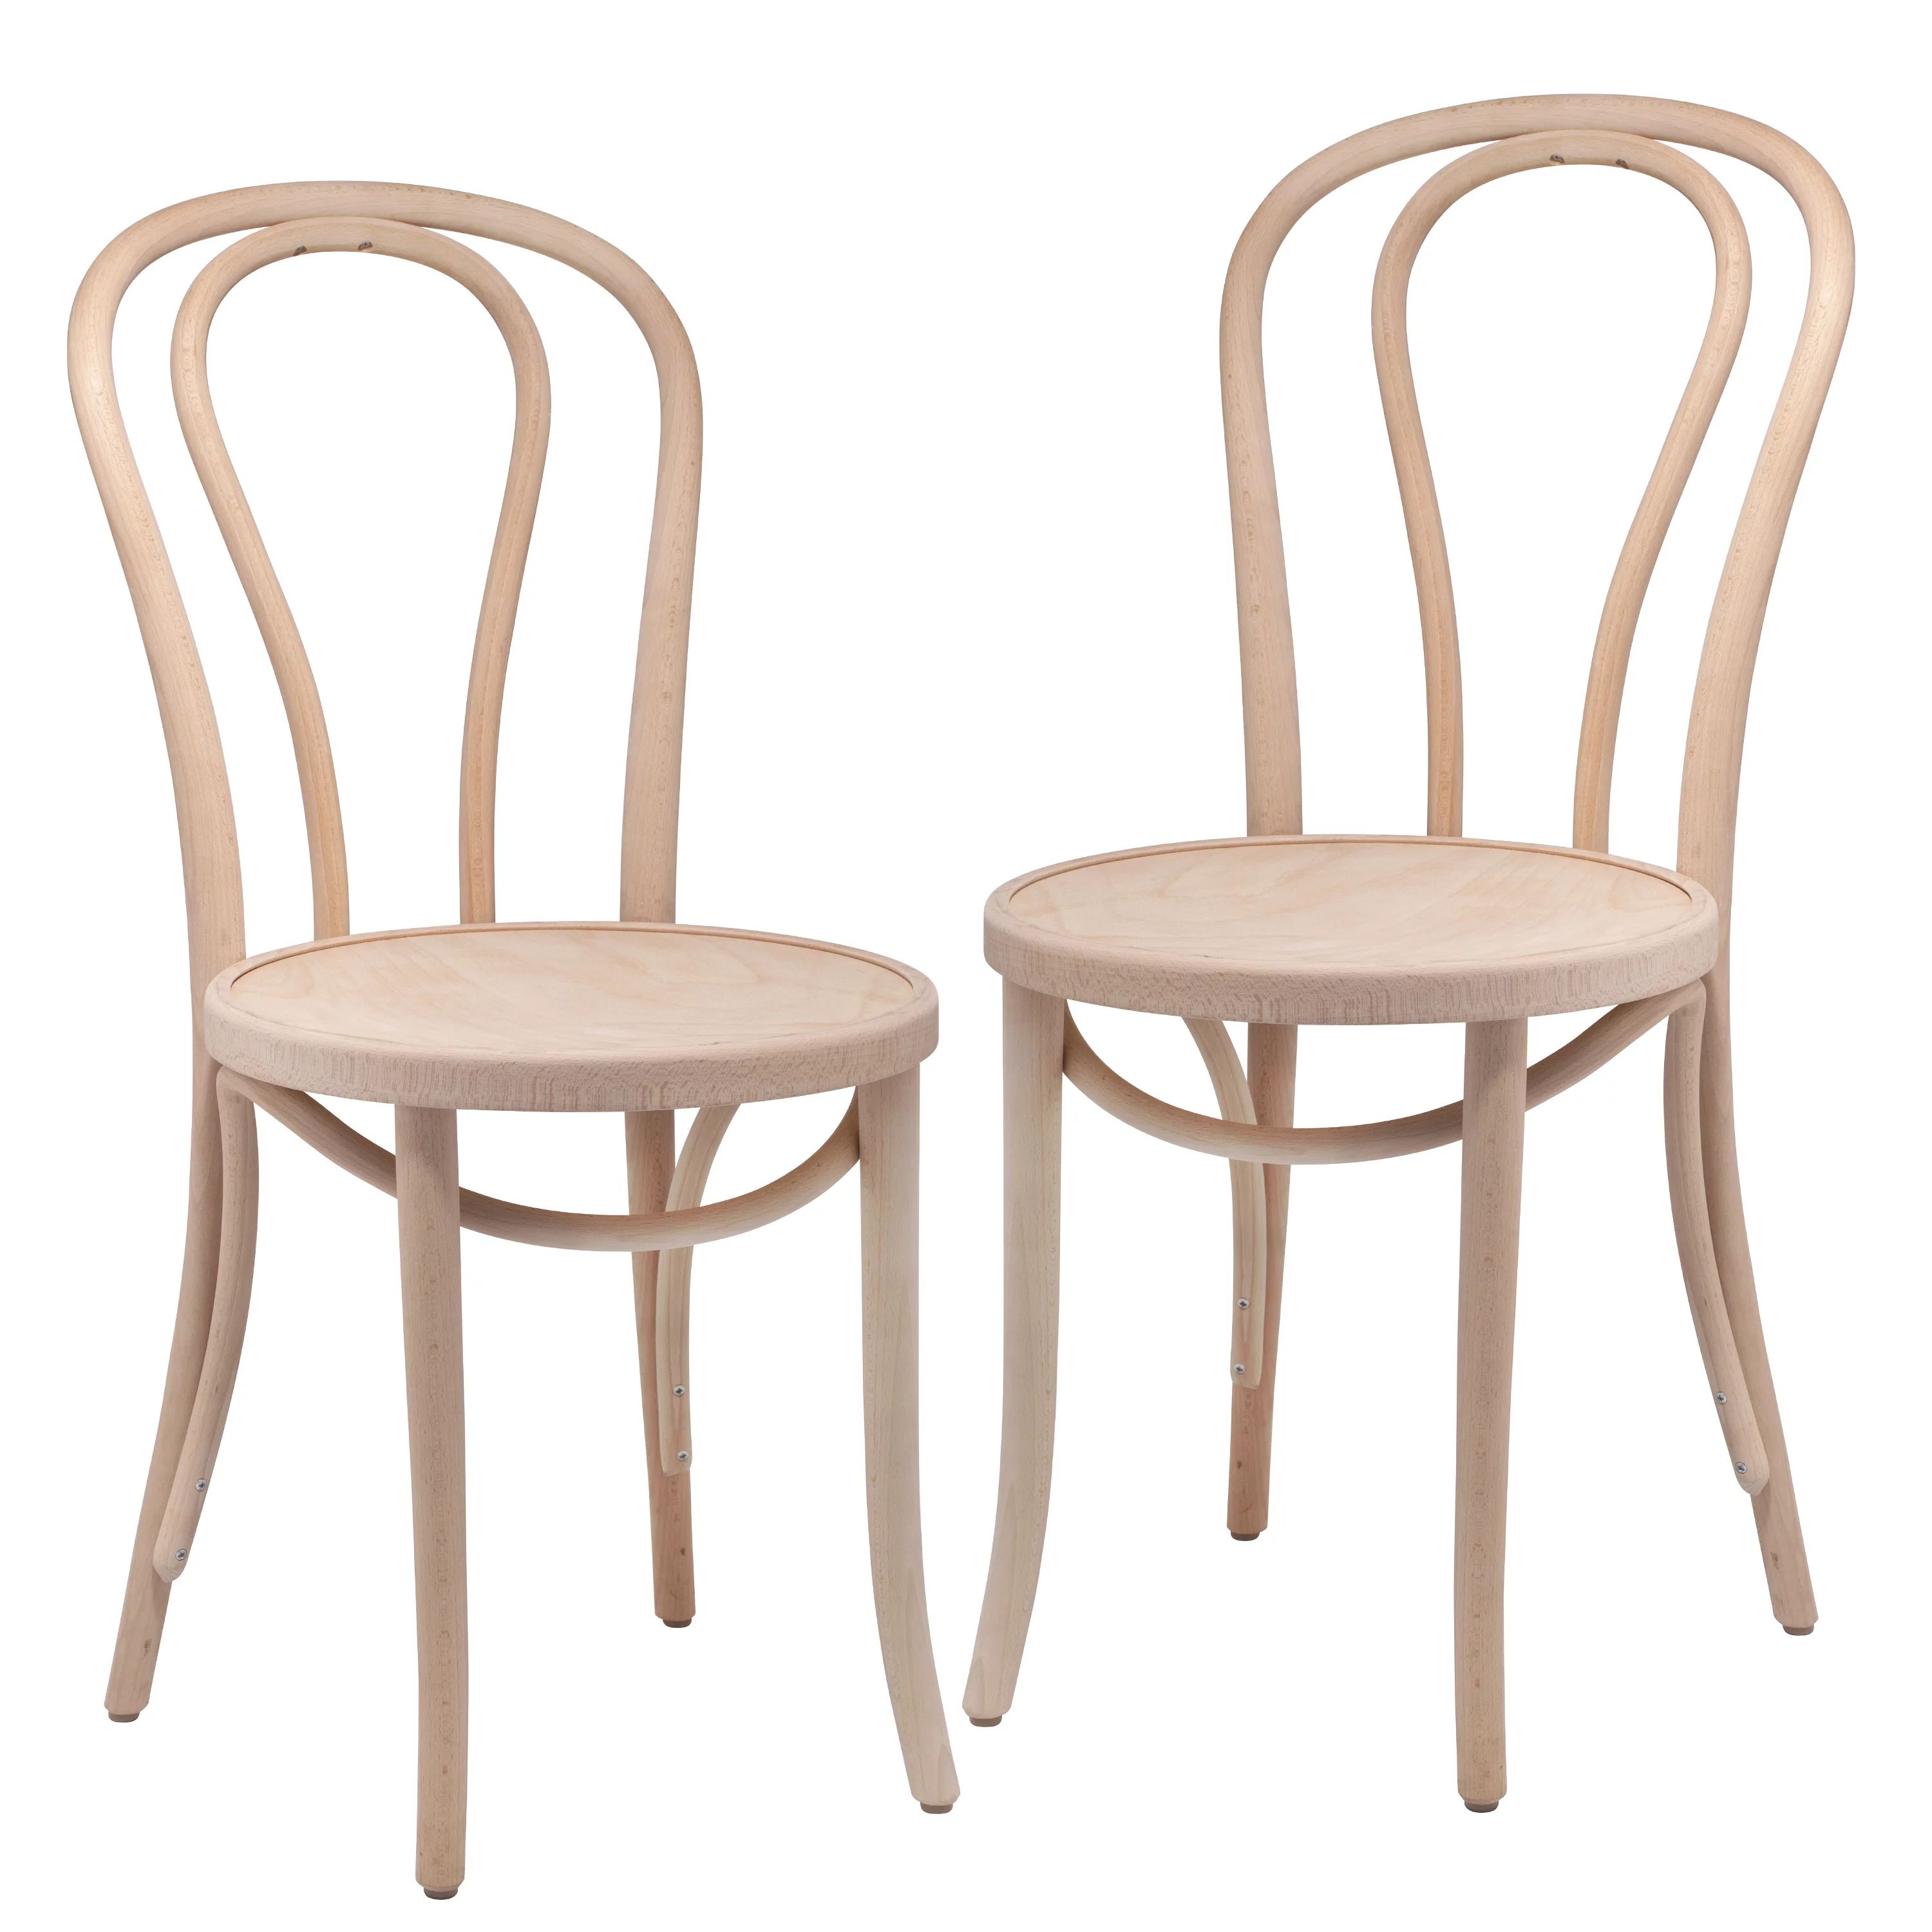 1018 Hairpin Bentwood Chairs, Modern Dining Room, Coffee Shop, Cafe, Kitchen Bistro, or Vanity Se... | Walmart (US)